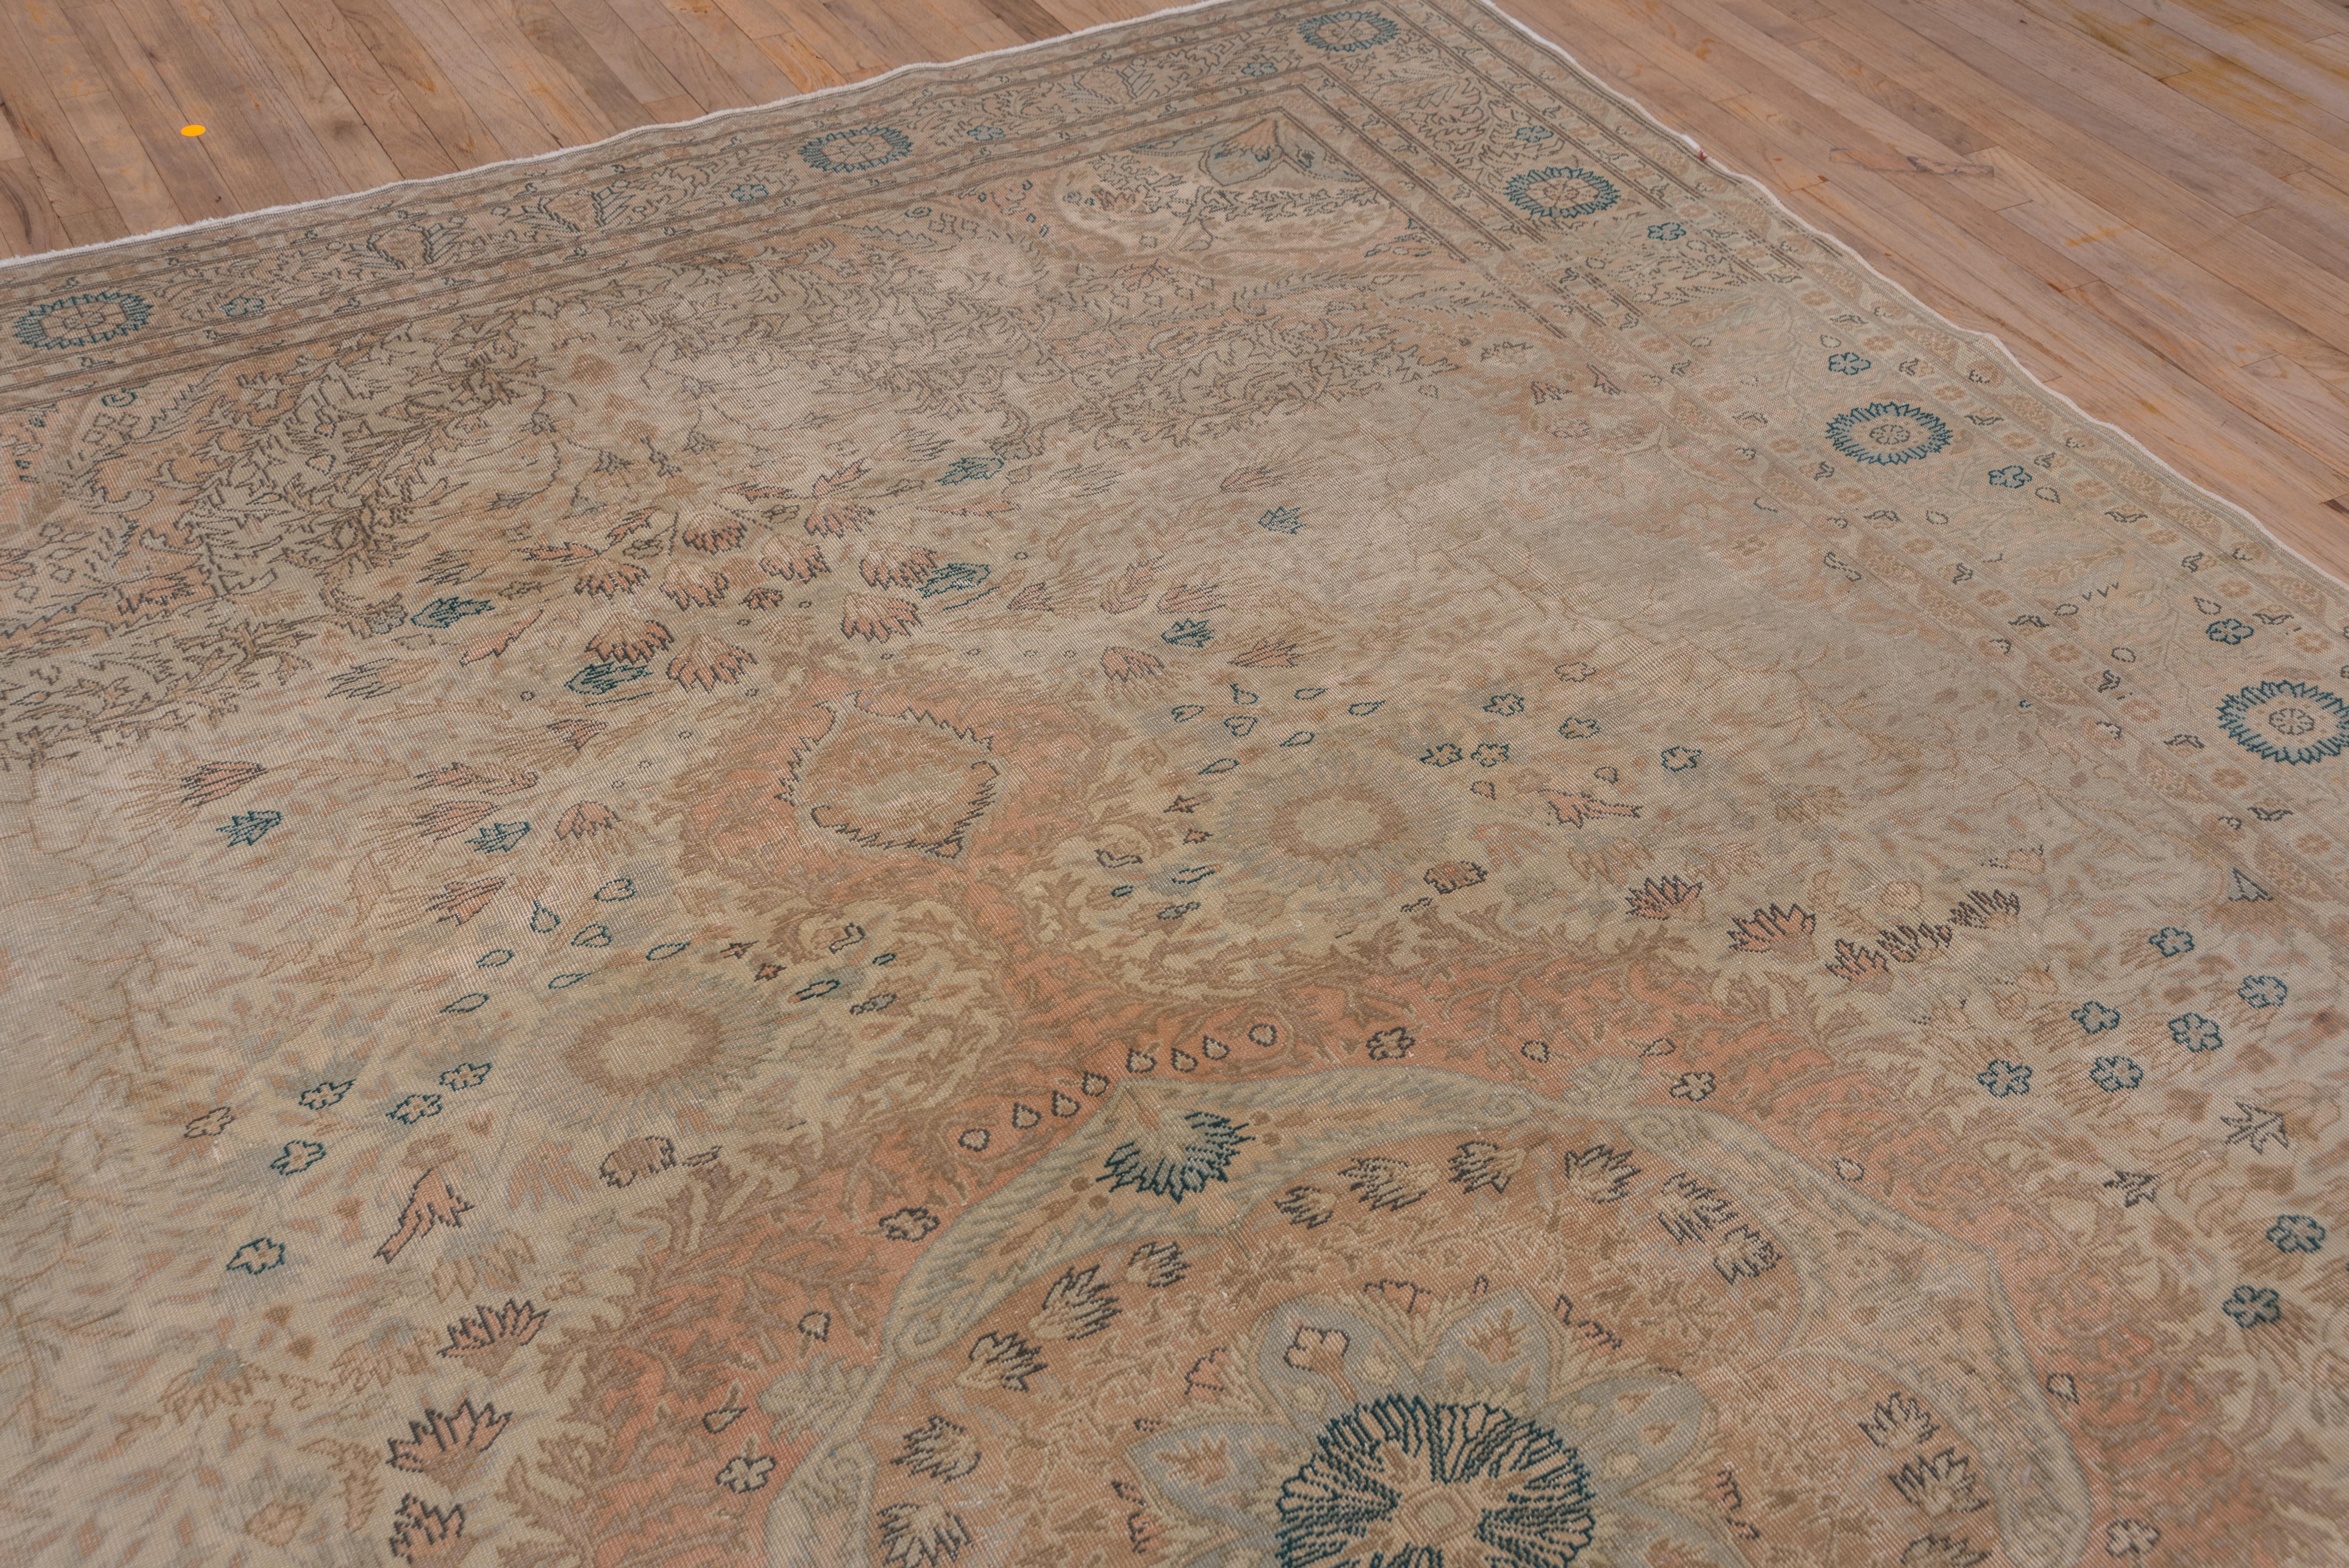 Kaisary and Sivas are thee two eastern Turkish cities whose rugs are in a Persian urban style. This Kaisary shows an eggshell ground with a layered floral wreath round pendanted medallion in pale blue, green and ivory with wine accents. Leaf and